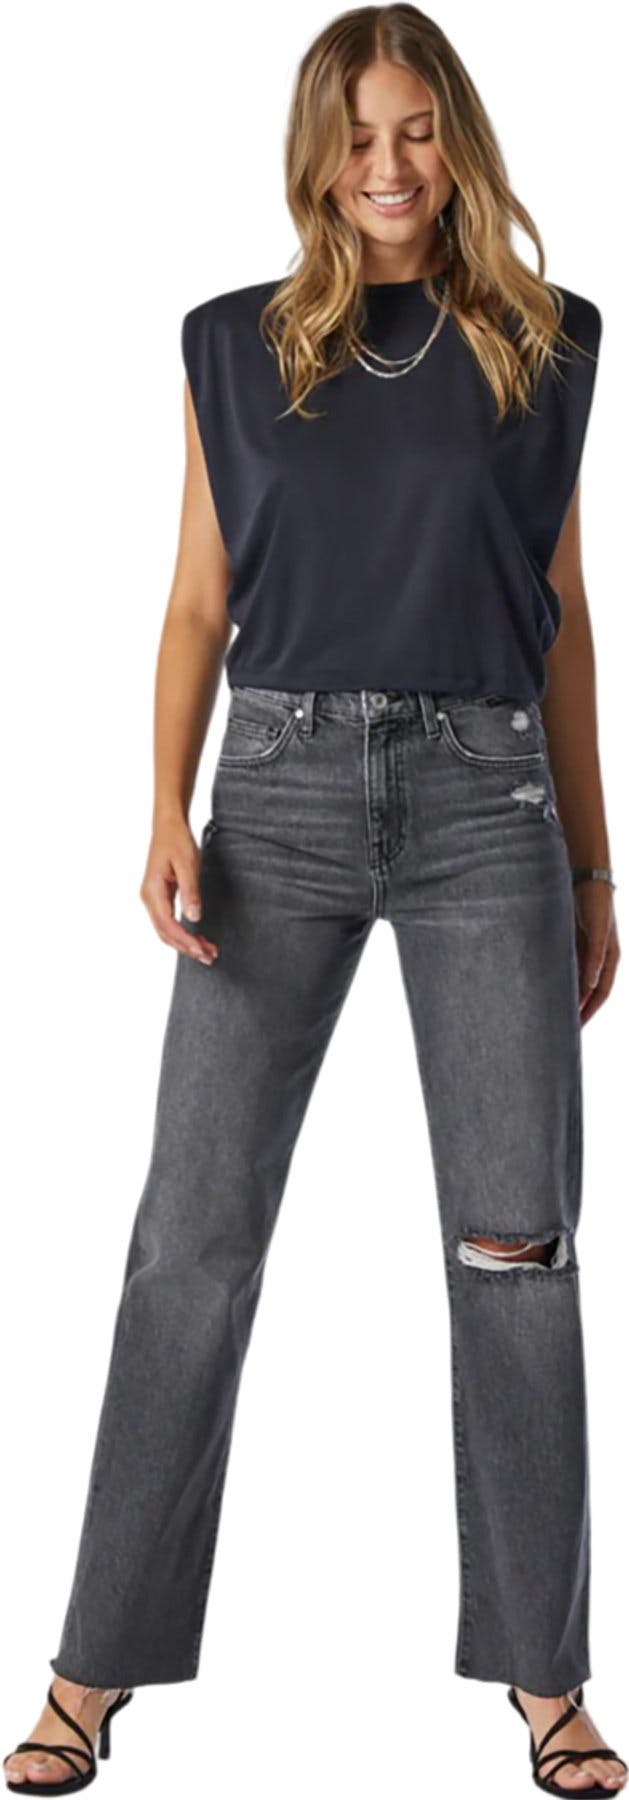 Product image for Barcelona Wide Leg Jeans - Women's